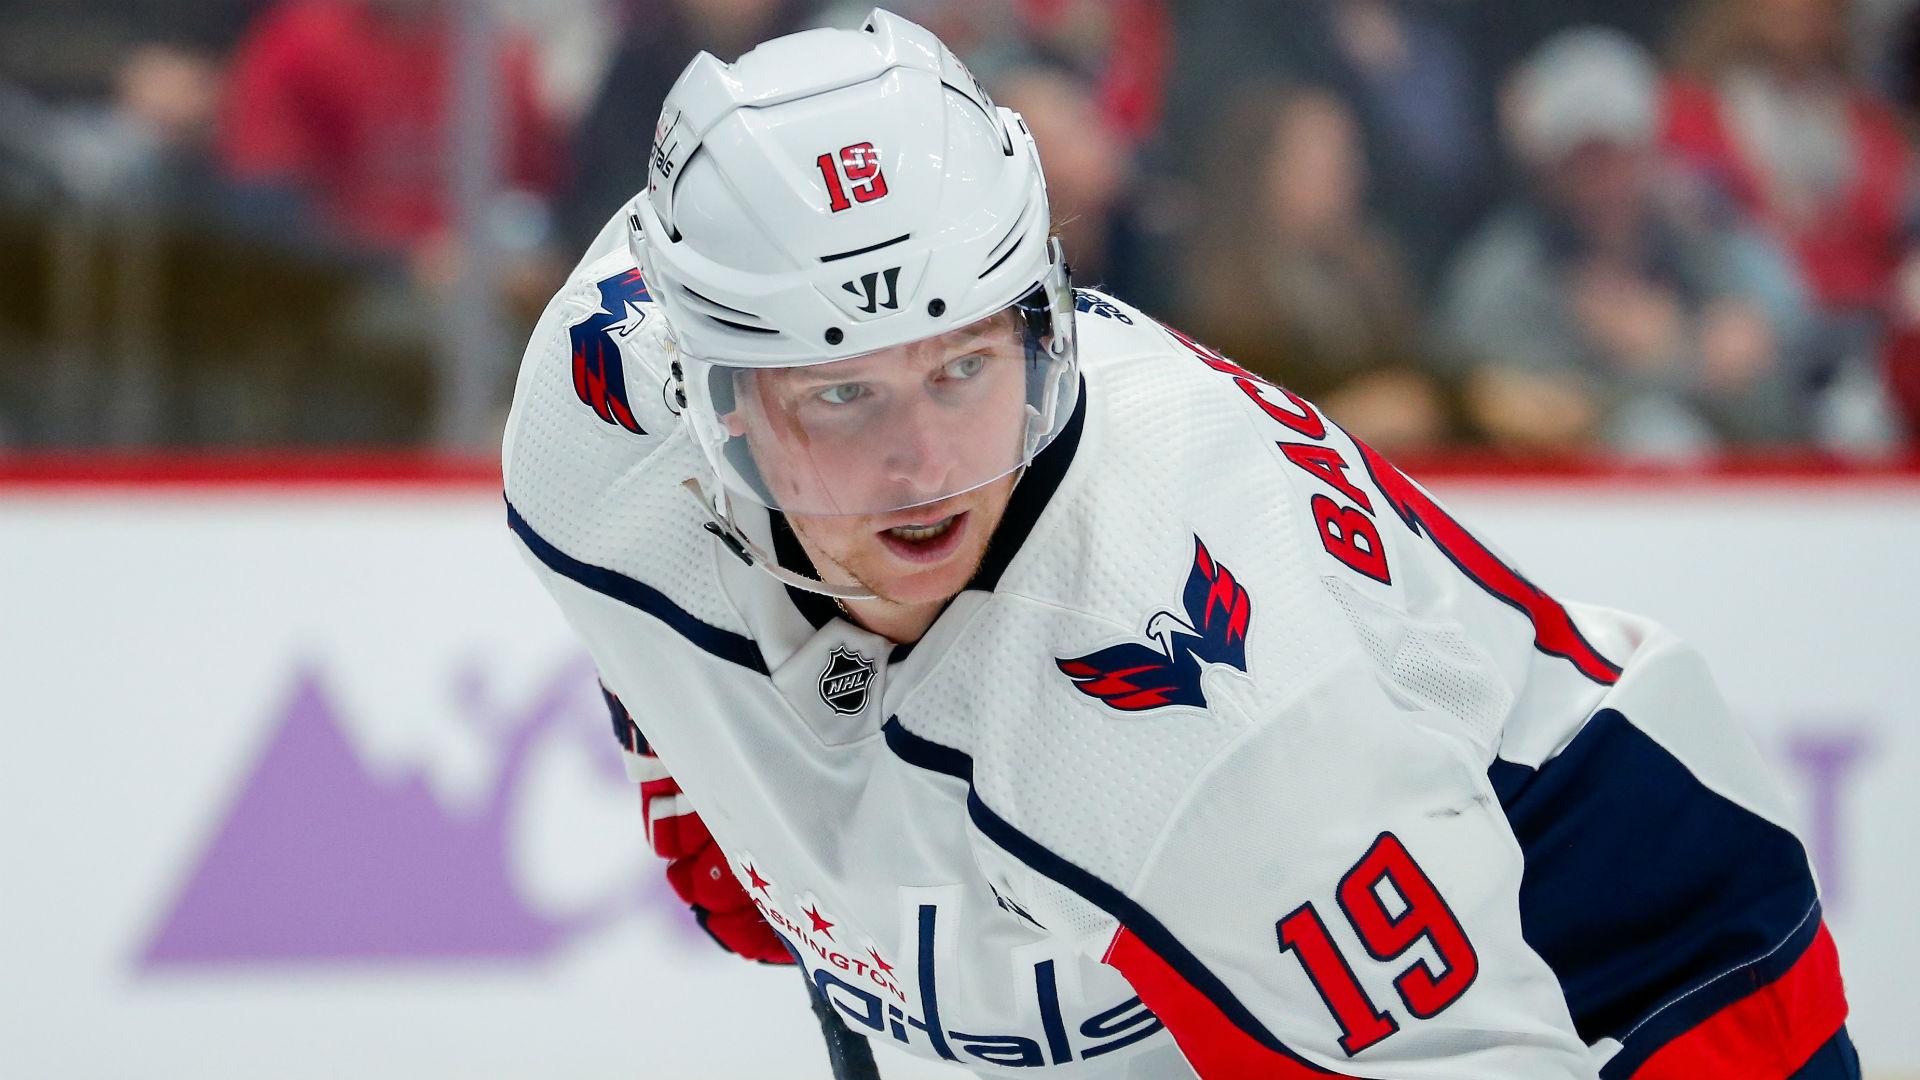 How To Vote Nicklas Backstrom Into The 2019 NHL All Star Game. NBC